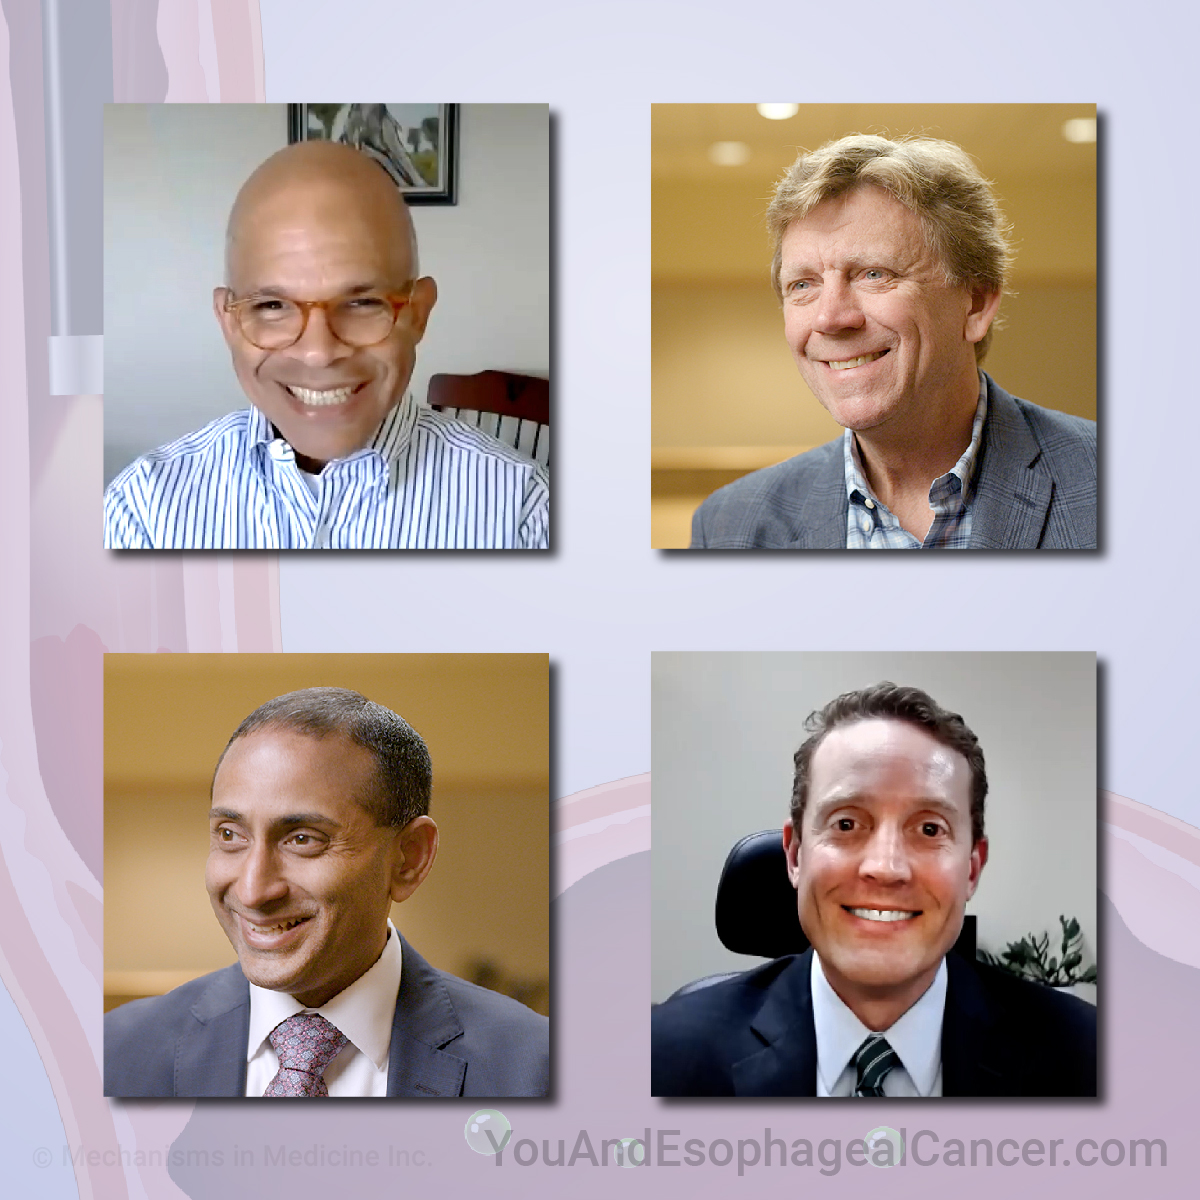 Watch an expert panel of Esophageal Cancer specialists discuss topics and questions that matter to patients